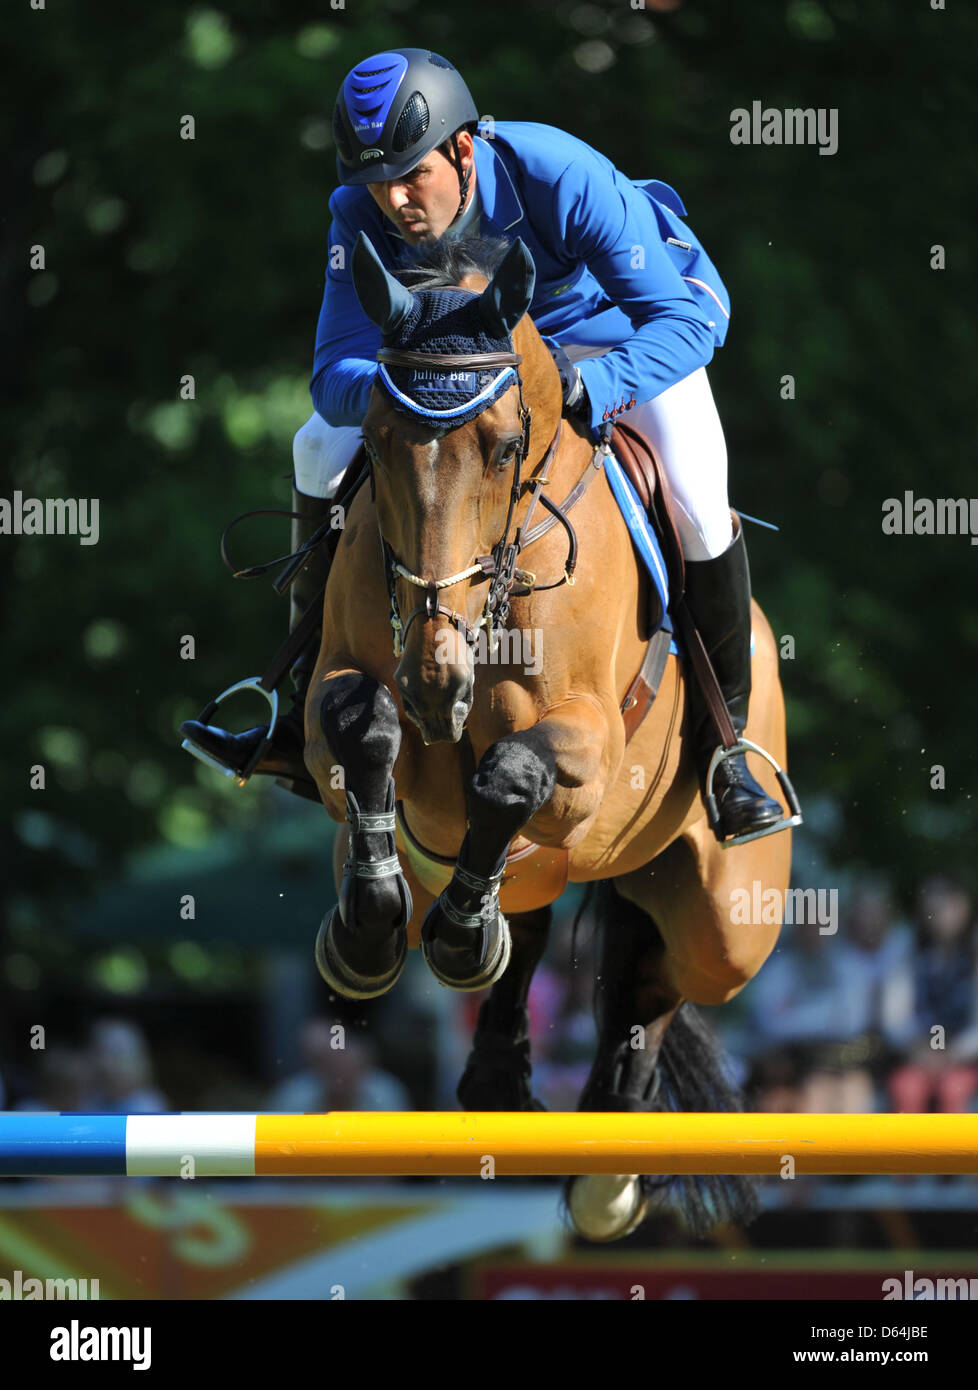 Alvaro Alfonso de Neto Miranda, Brazil, husband of Athina Onassis, jumps with his horse AD Rahmannshof Bogeno during the Global Champions Tour equestrian in Wiesbaden, Germany, 26 May 2012. Photo: Arne Dedert Stock Photo